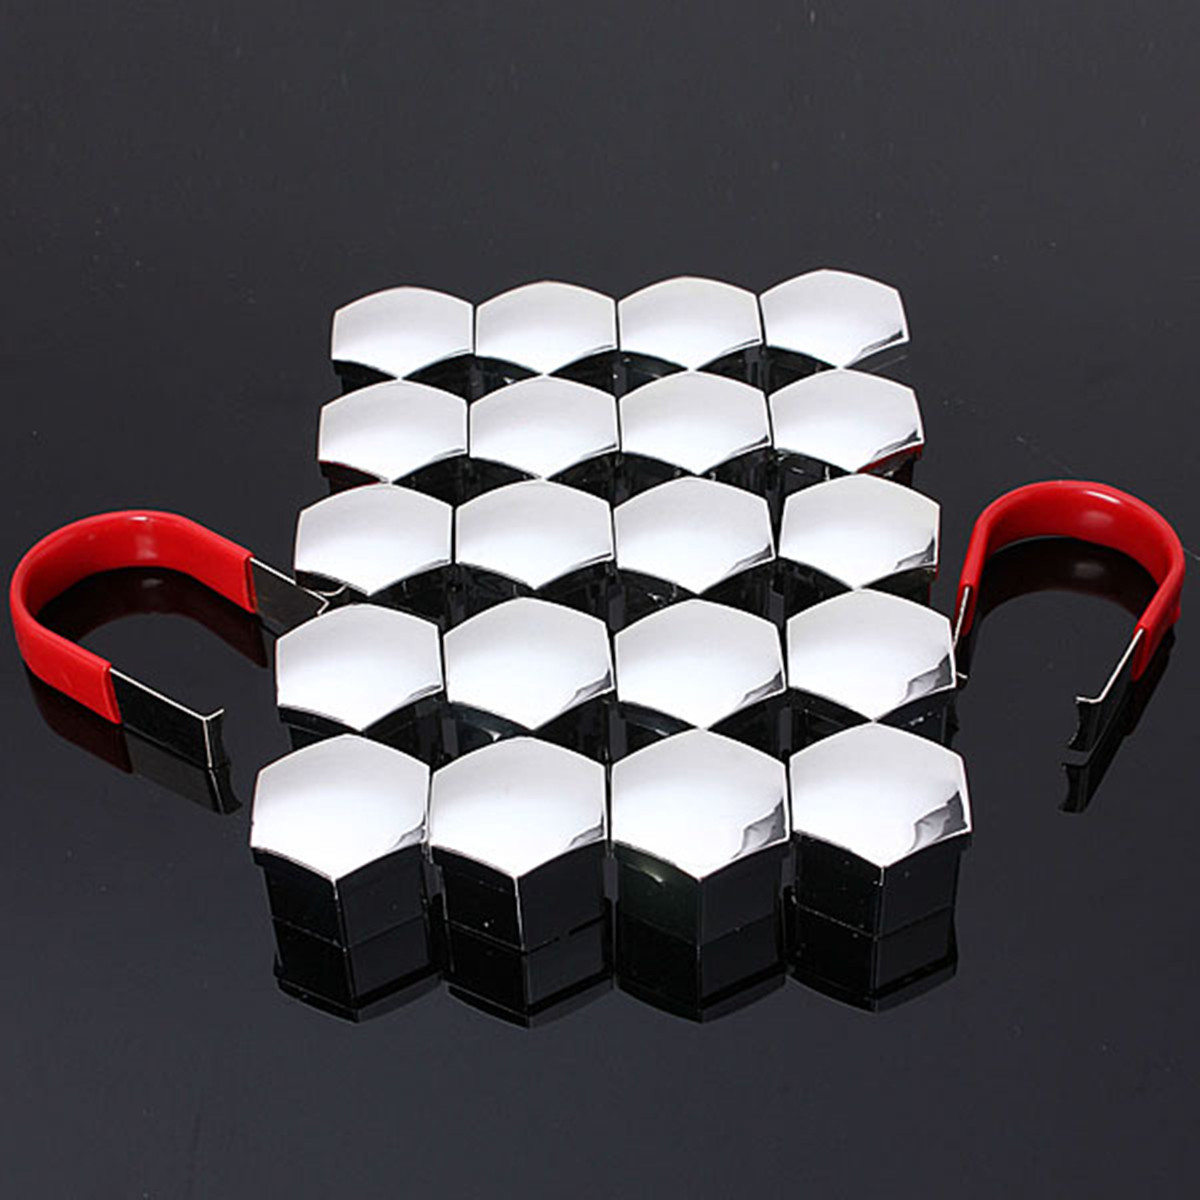 20pcs 19mm Car Plastic Tyre Wheel Hub Covers Caps Bolts Covers Nuts Alloy Wheel Protector